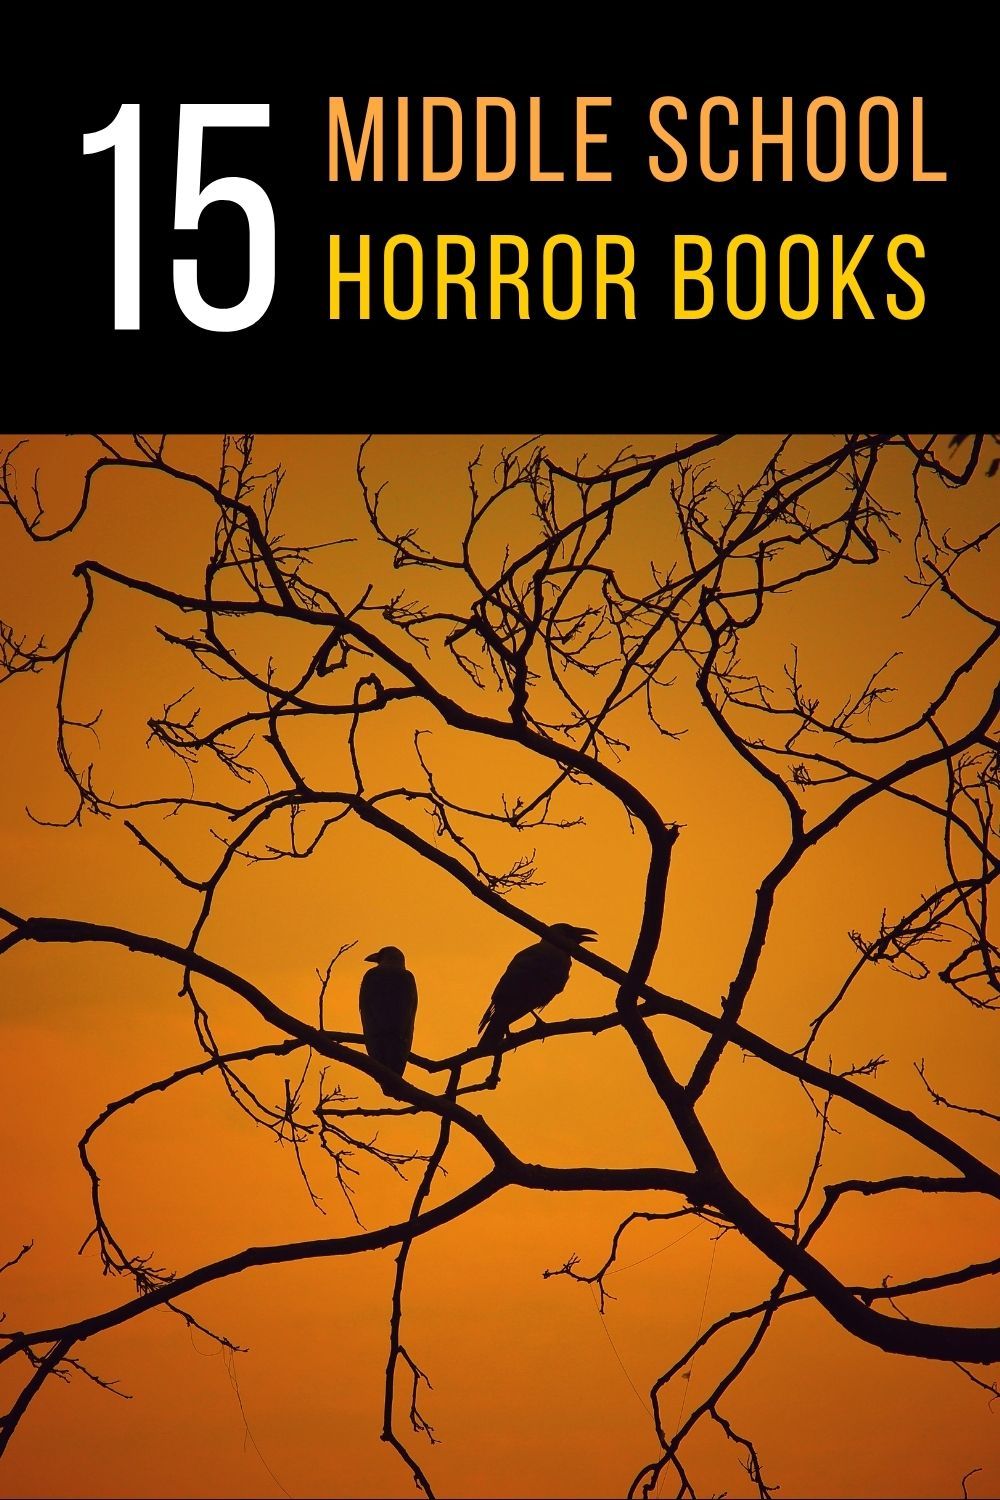 Horror Books for Middle School 15 Spooky Titles for Middle Graders